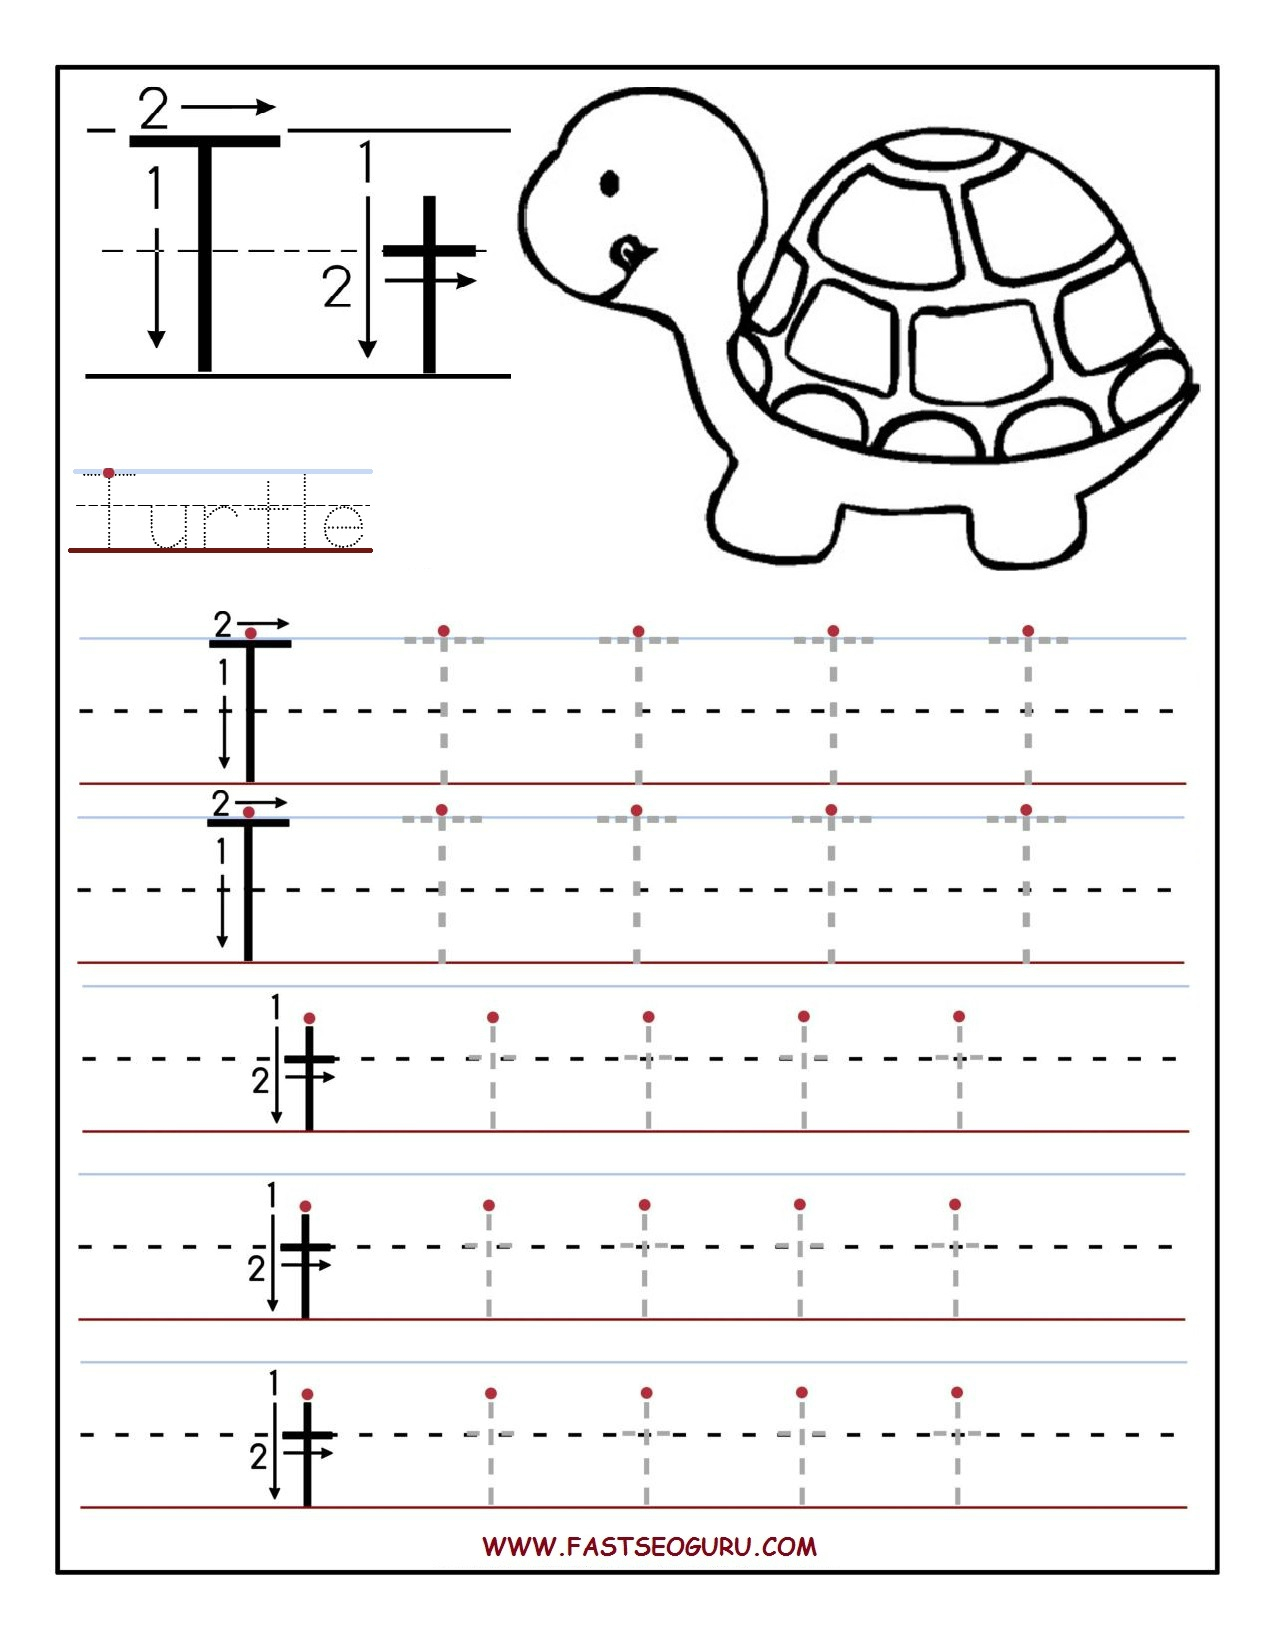 Printable Letter T Tracing Worksheets For Preschool Uldwvdrz within Tracing Letter T Worksheets